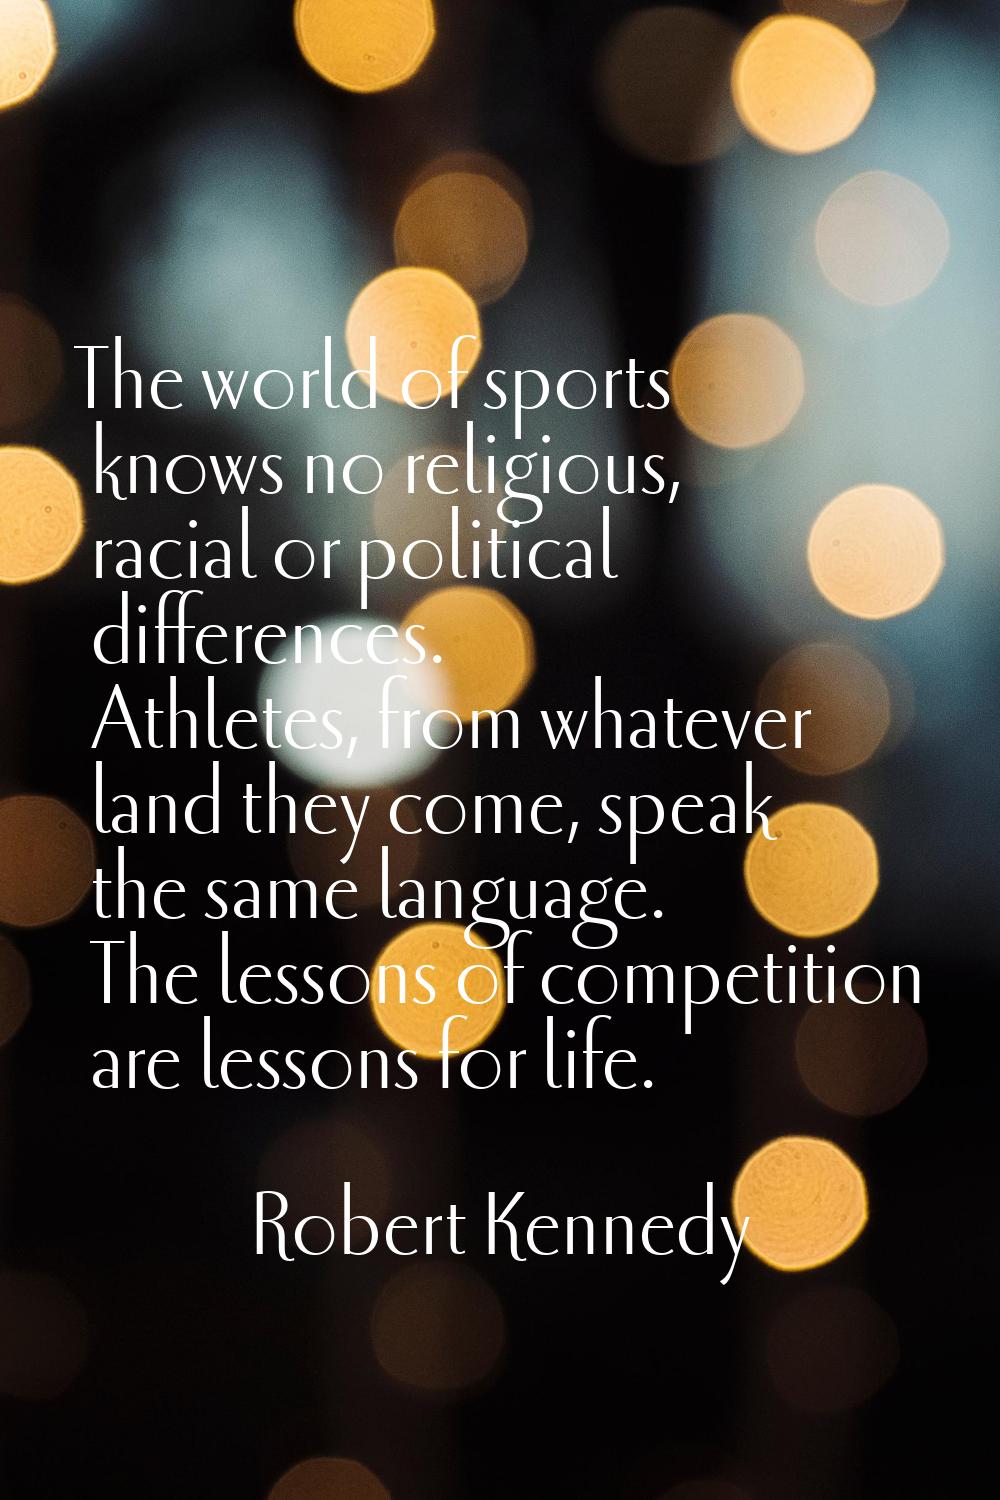 The world of sports knows no religious, racial or political differences. Athletes, from whatever la